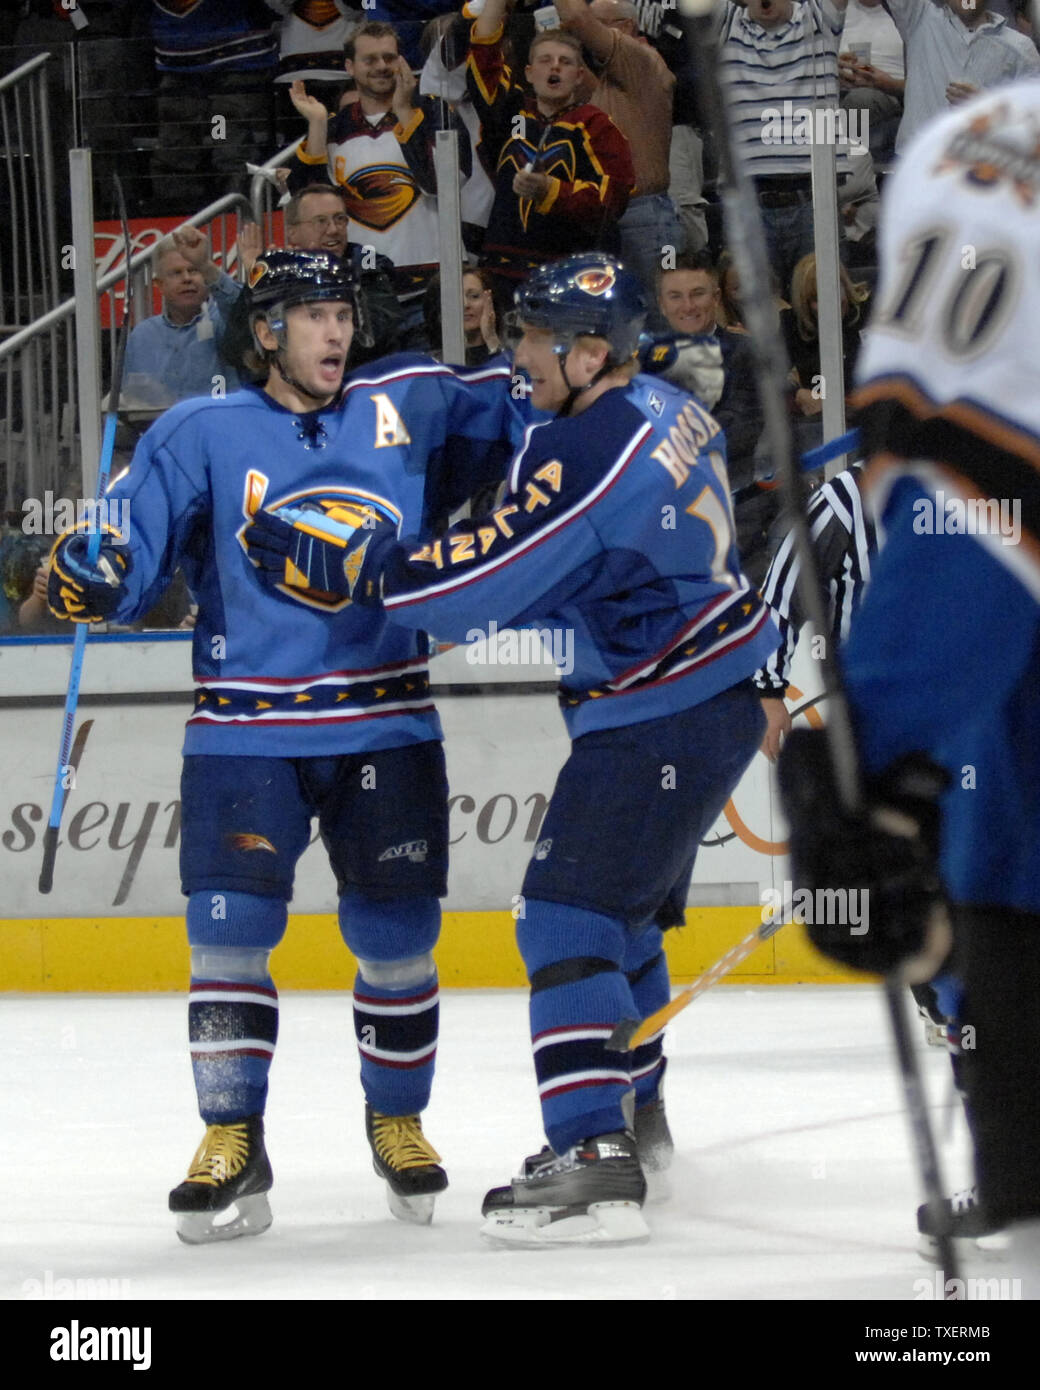 Atlanta Thrashers Vyacheslav Kozlov (13) of Russia is congratulated by teammate Marian Hossa (18) of Slovakia for a goal against the Washington Capitals in the first period at Philips Arena in Atlanta, March 12, 2007. (UPI Photo/John Dickerson) Stock Photo